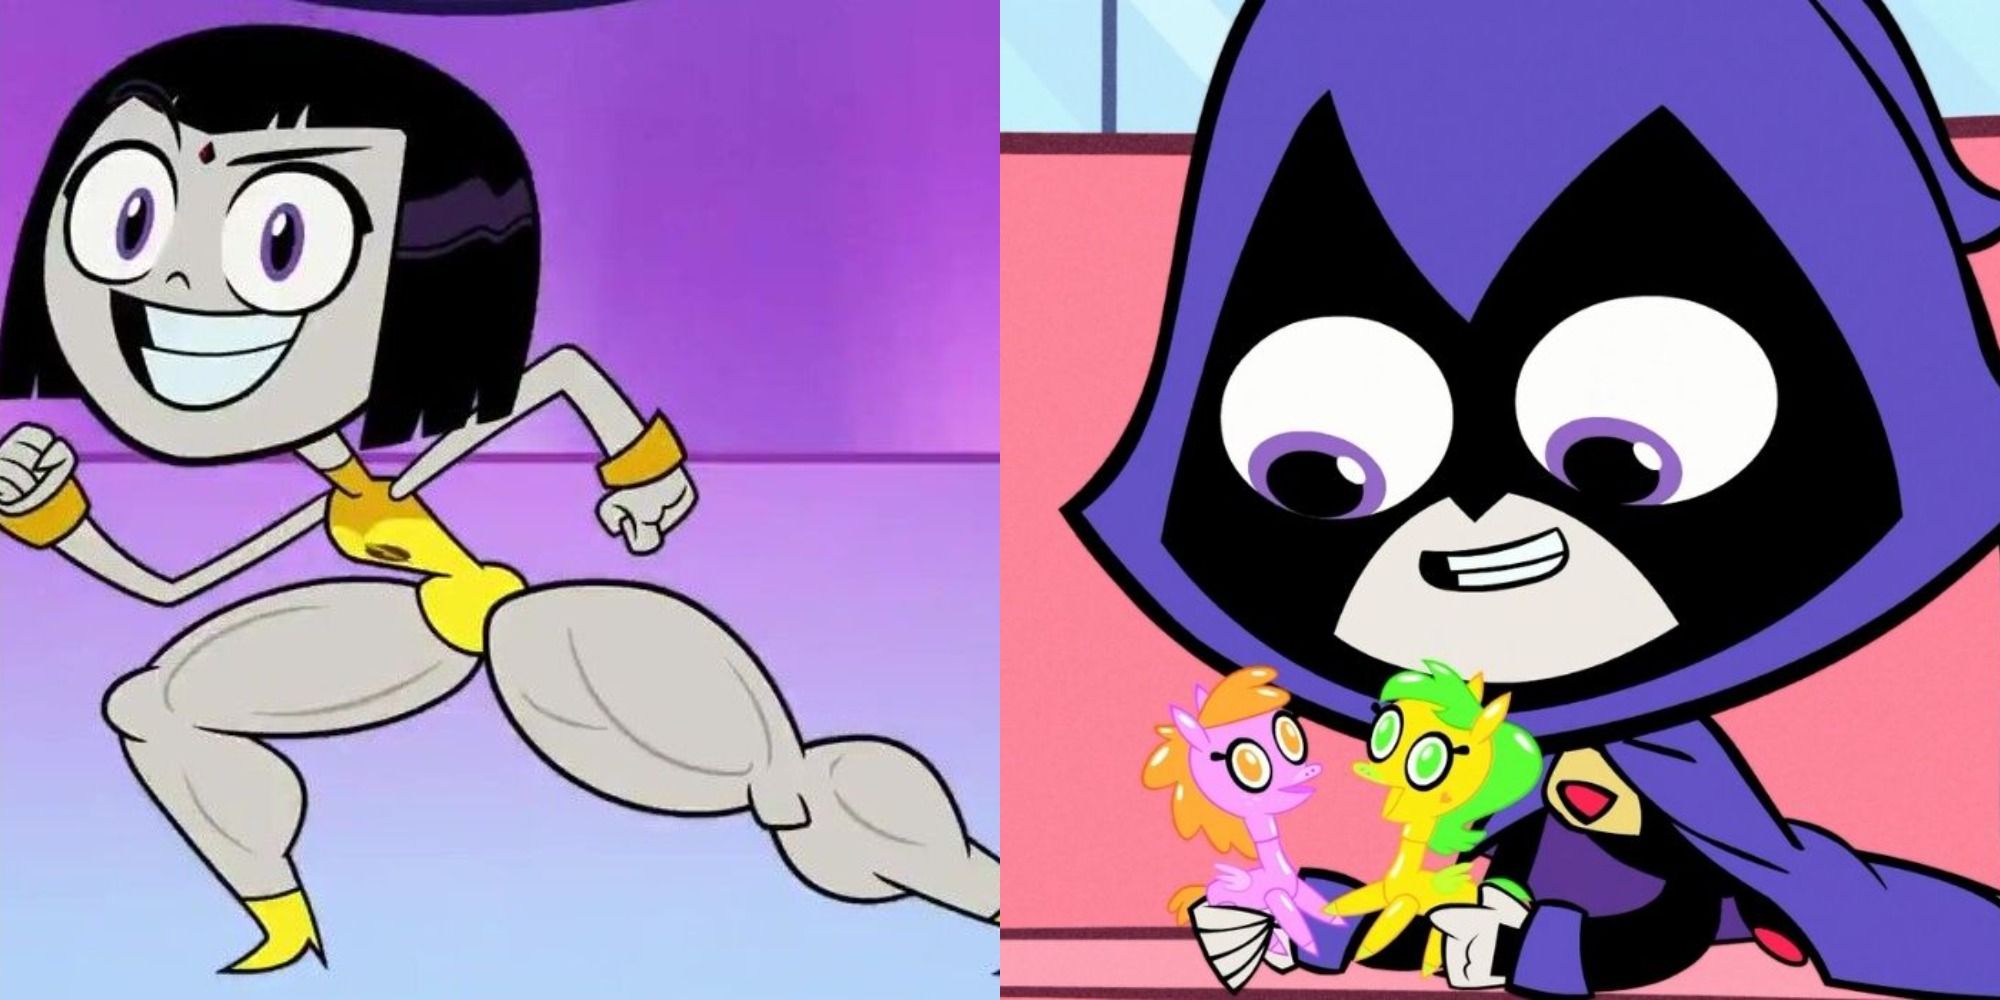 Split image showing Raven as Lady Legasus and playing with the Pretty Pegasi in Teen Titans GO